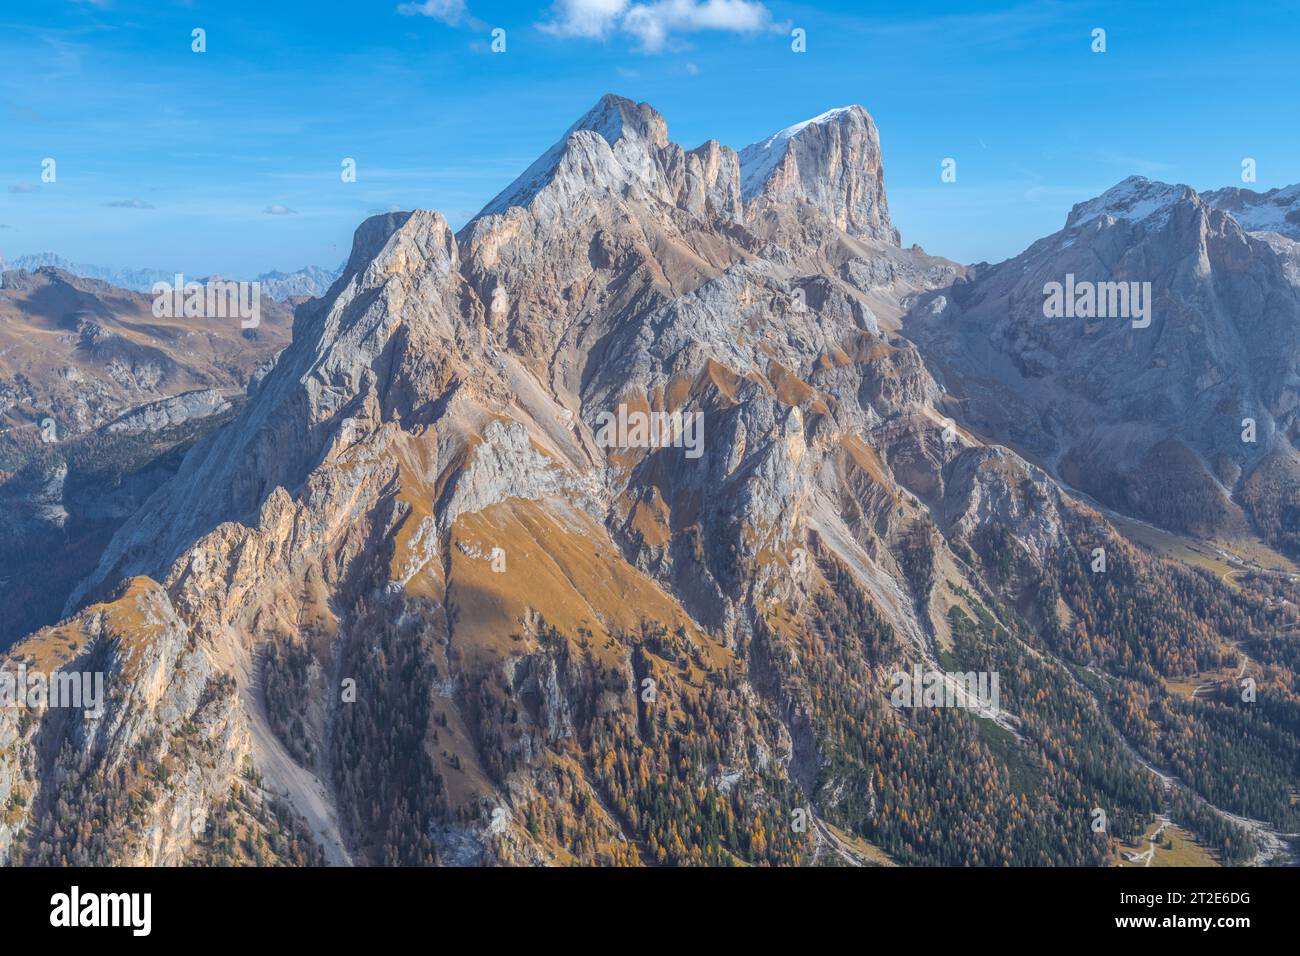 Summit view of the Marmolada massif in the Italian Dolomites. Autumnal vegetation in the grassy slopes and alpine valleys. Stock Photo